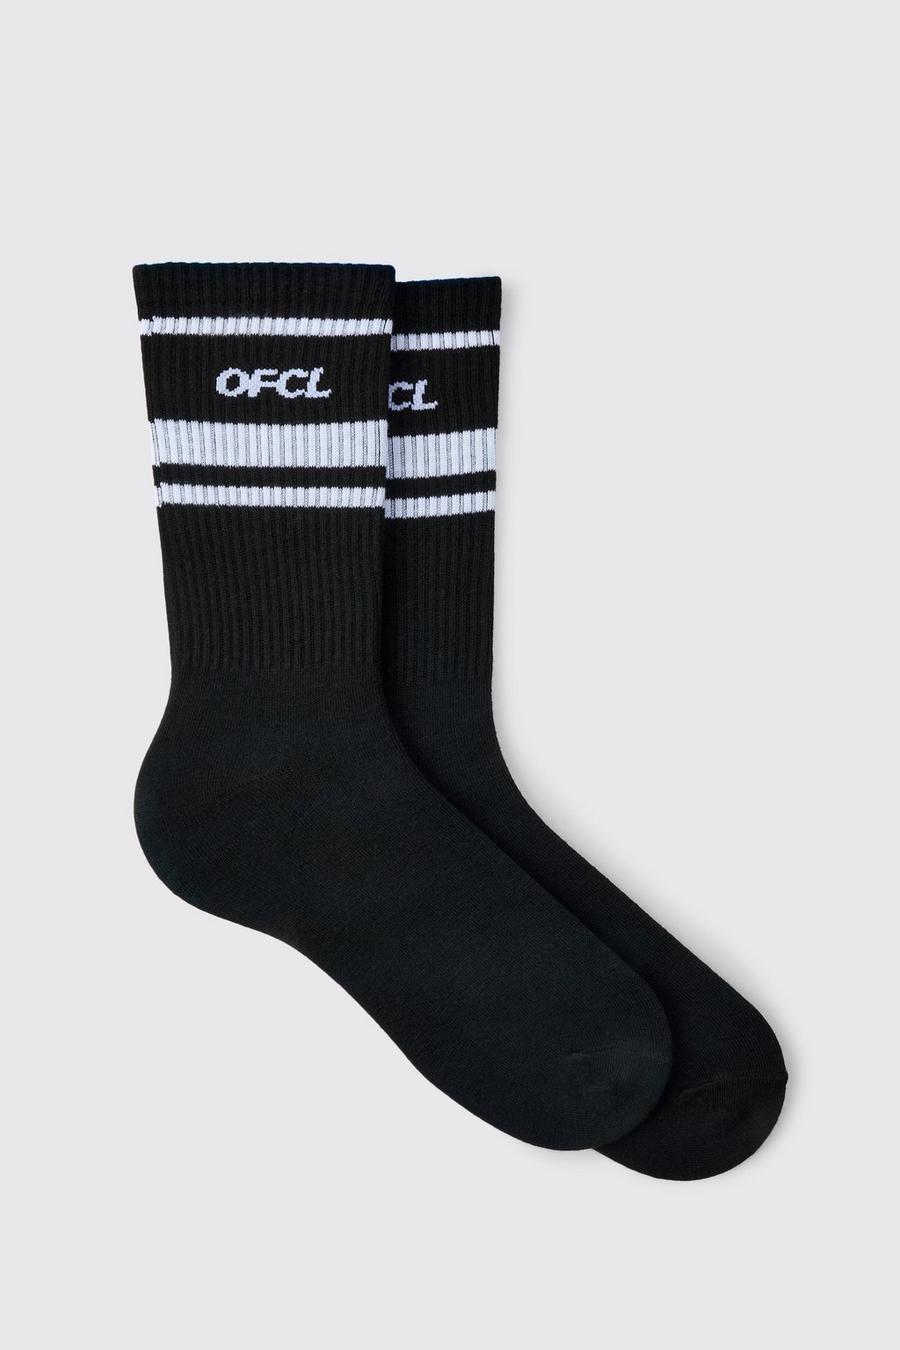 Chaussettes à rayures - Ofcl, Black image number 1